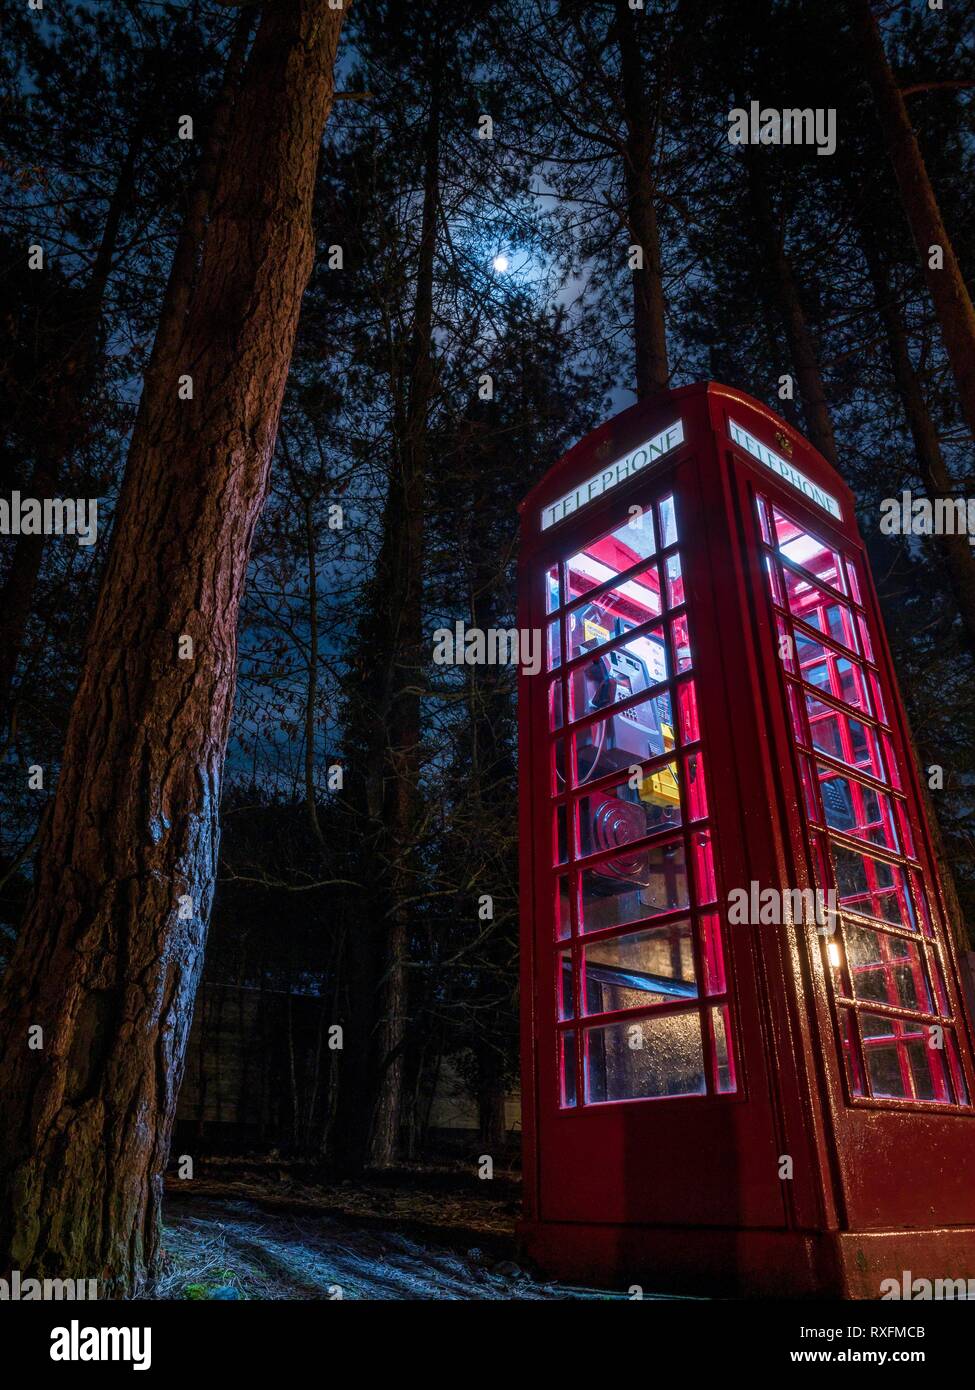 A red phone box lit up at night in a forest in England Stock Photo